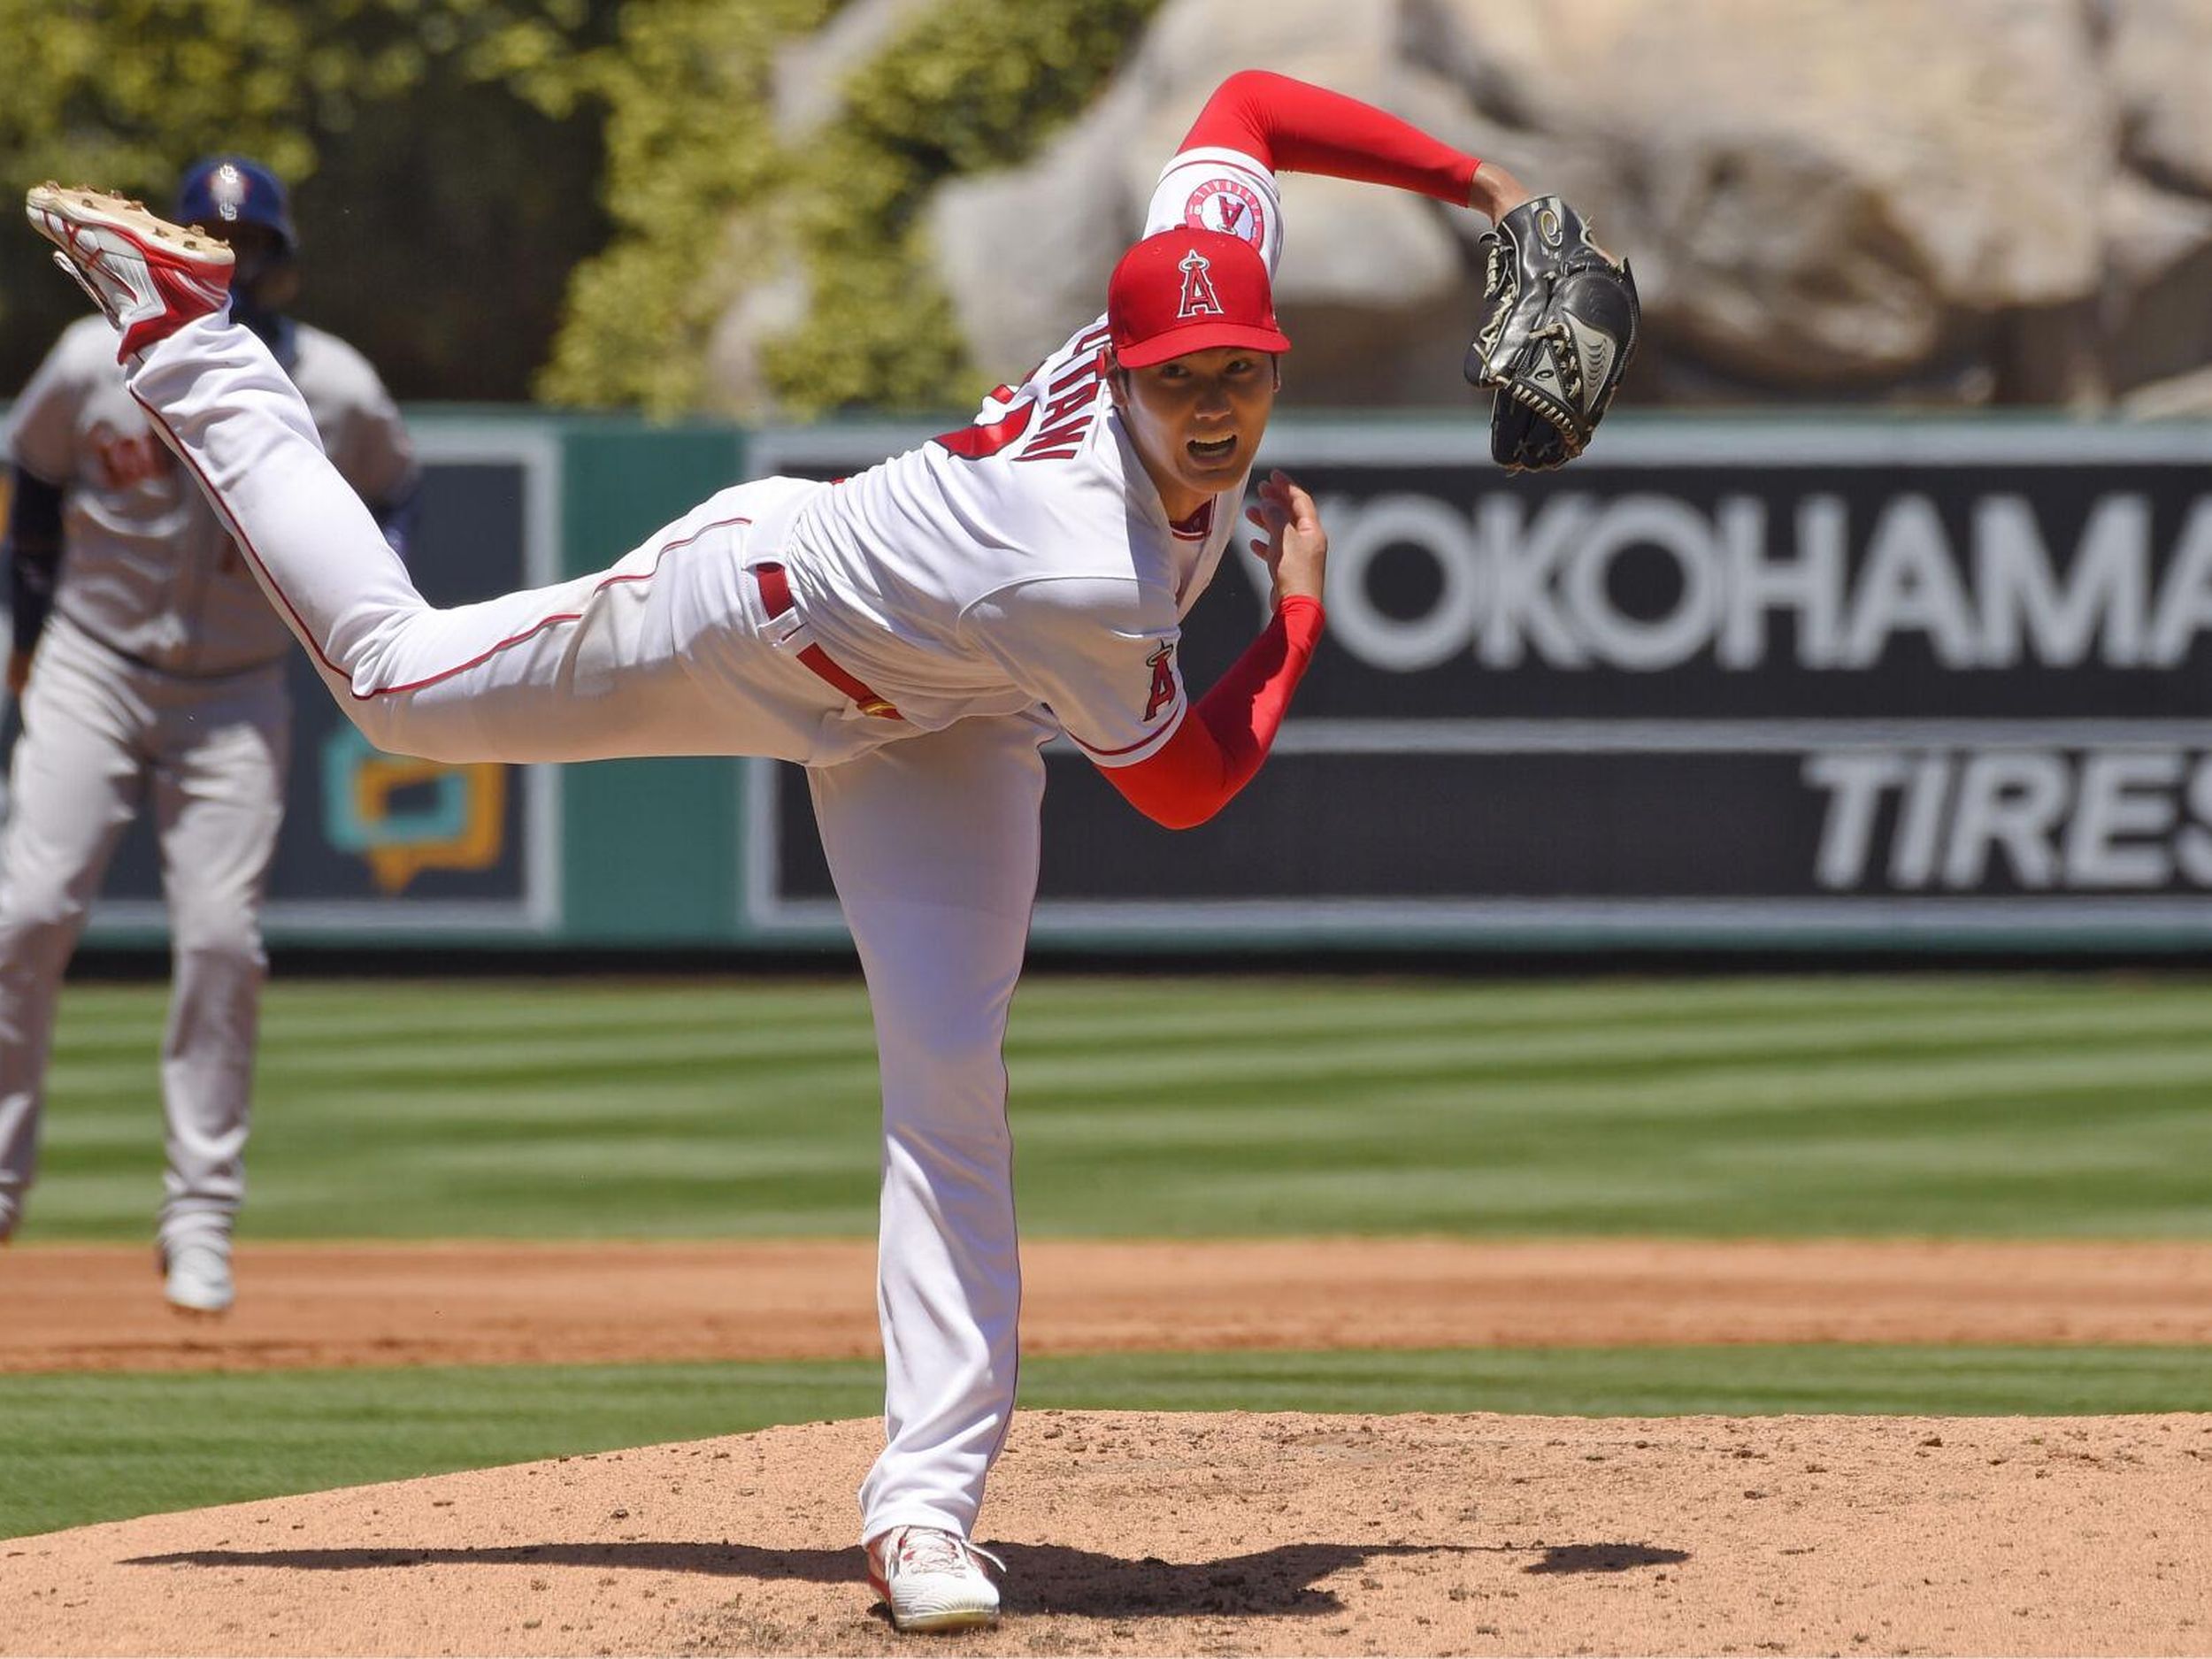 Los Angeles Angels 2020 player review: Shohei Ohtani